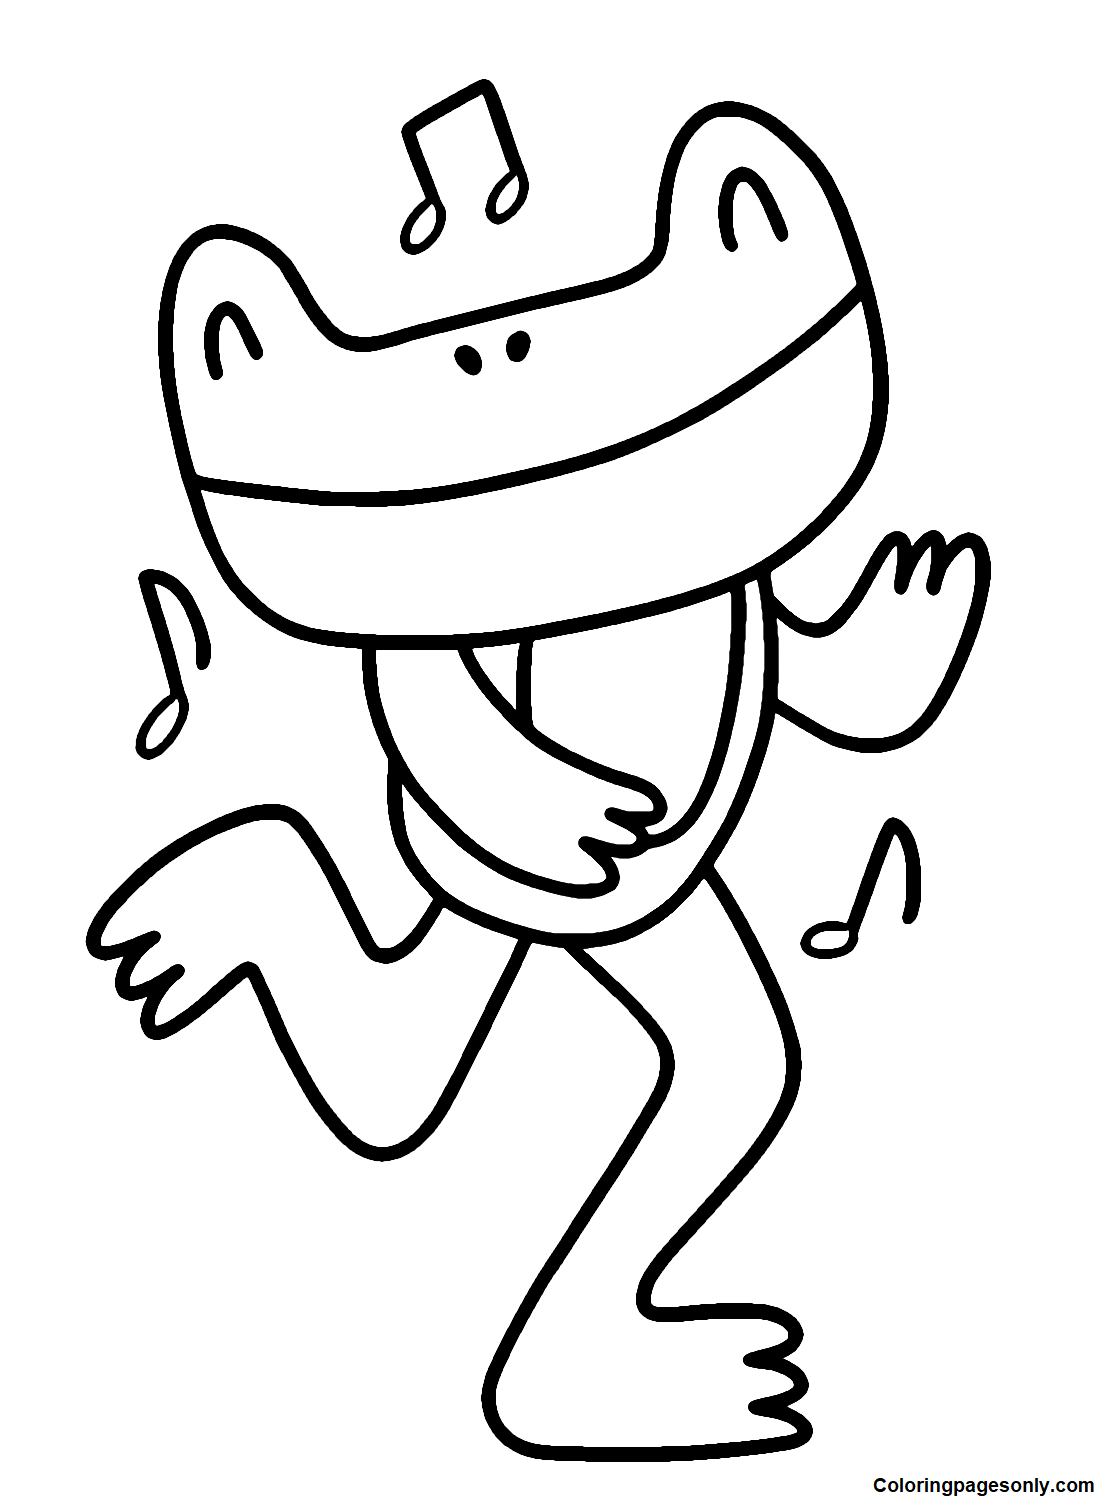 Dancing Frog Coloring Page